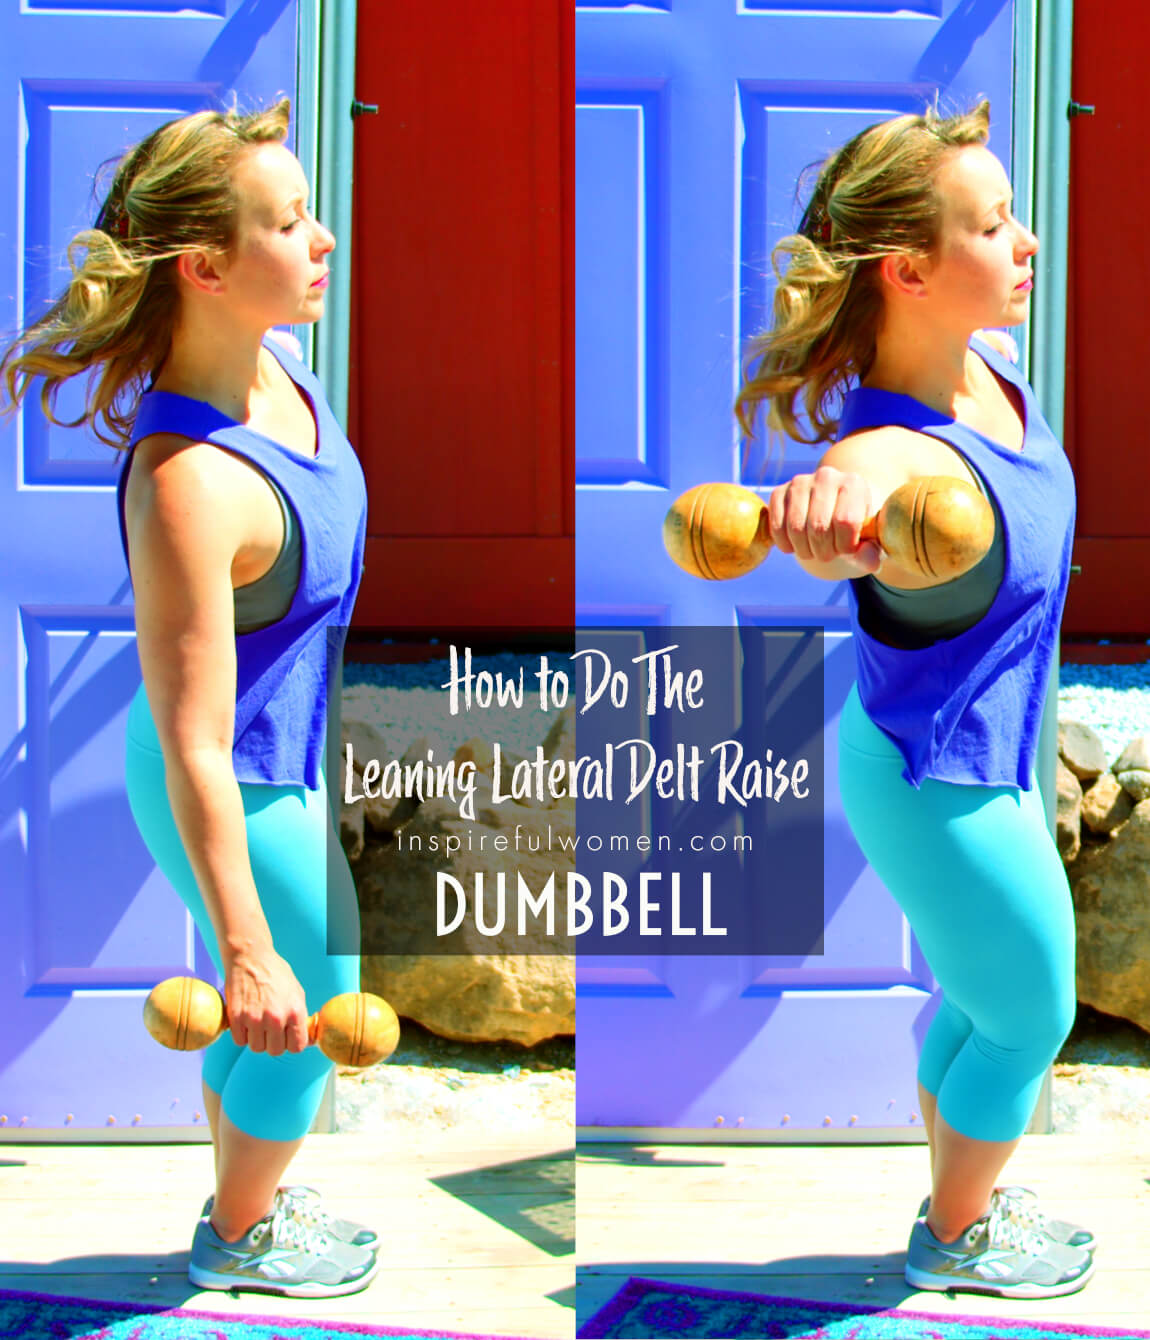 how-to-do-dumbbell-leaning-lateral-delt-raise-shoulder-exercise-at-home-women-over-40